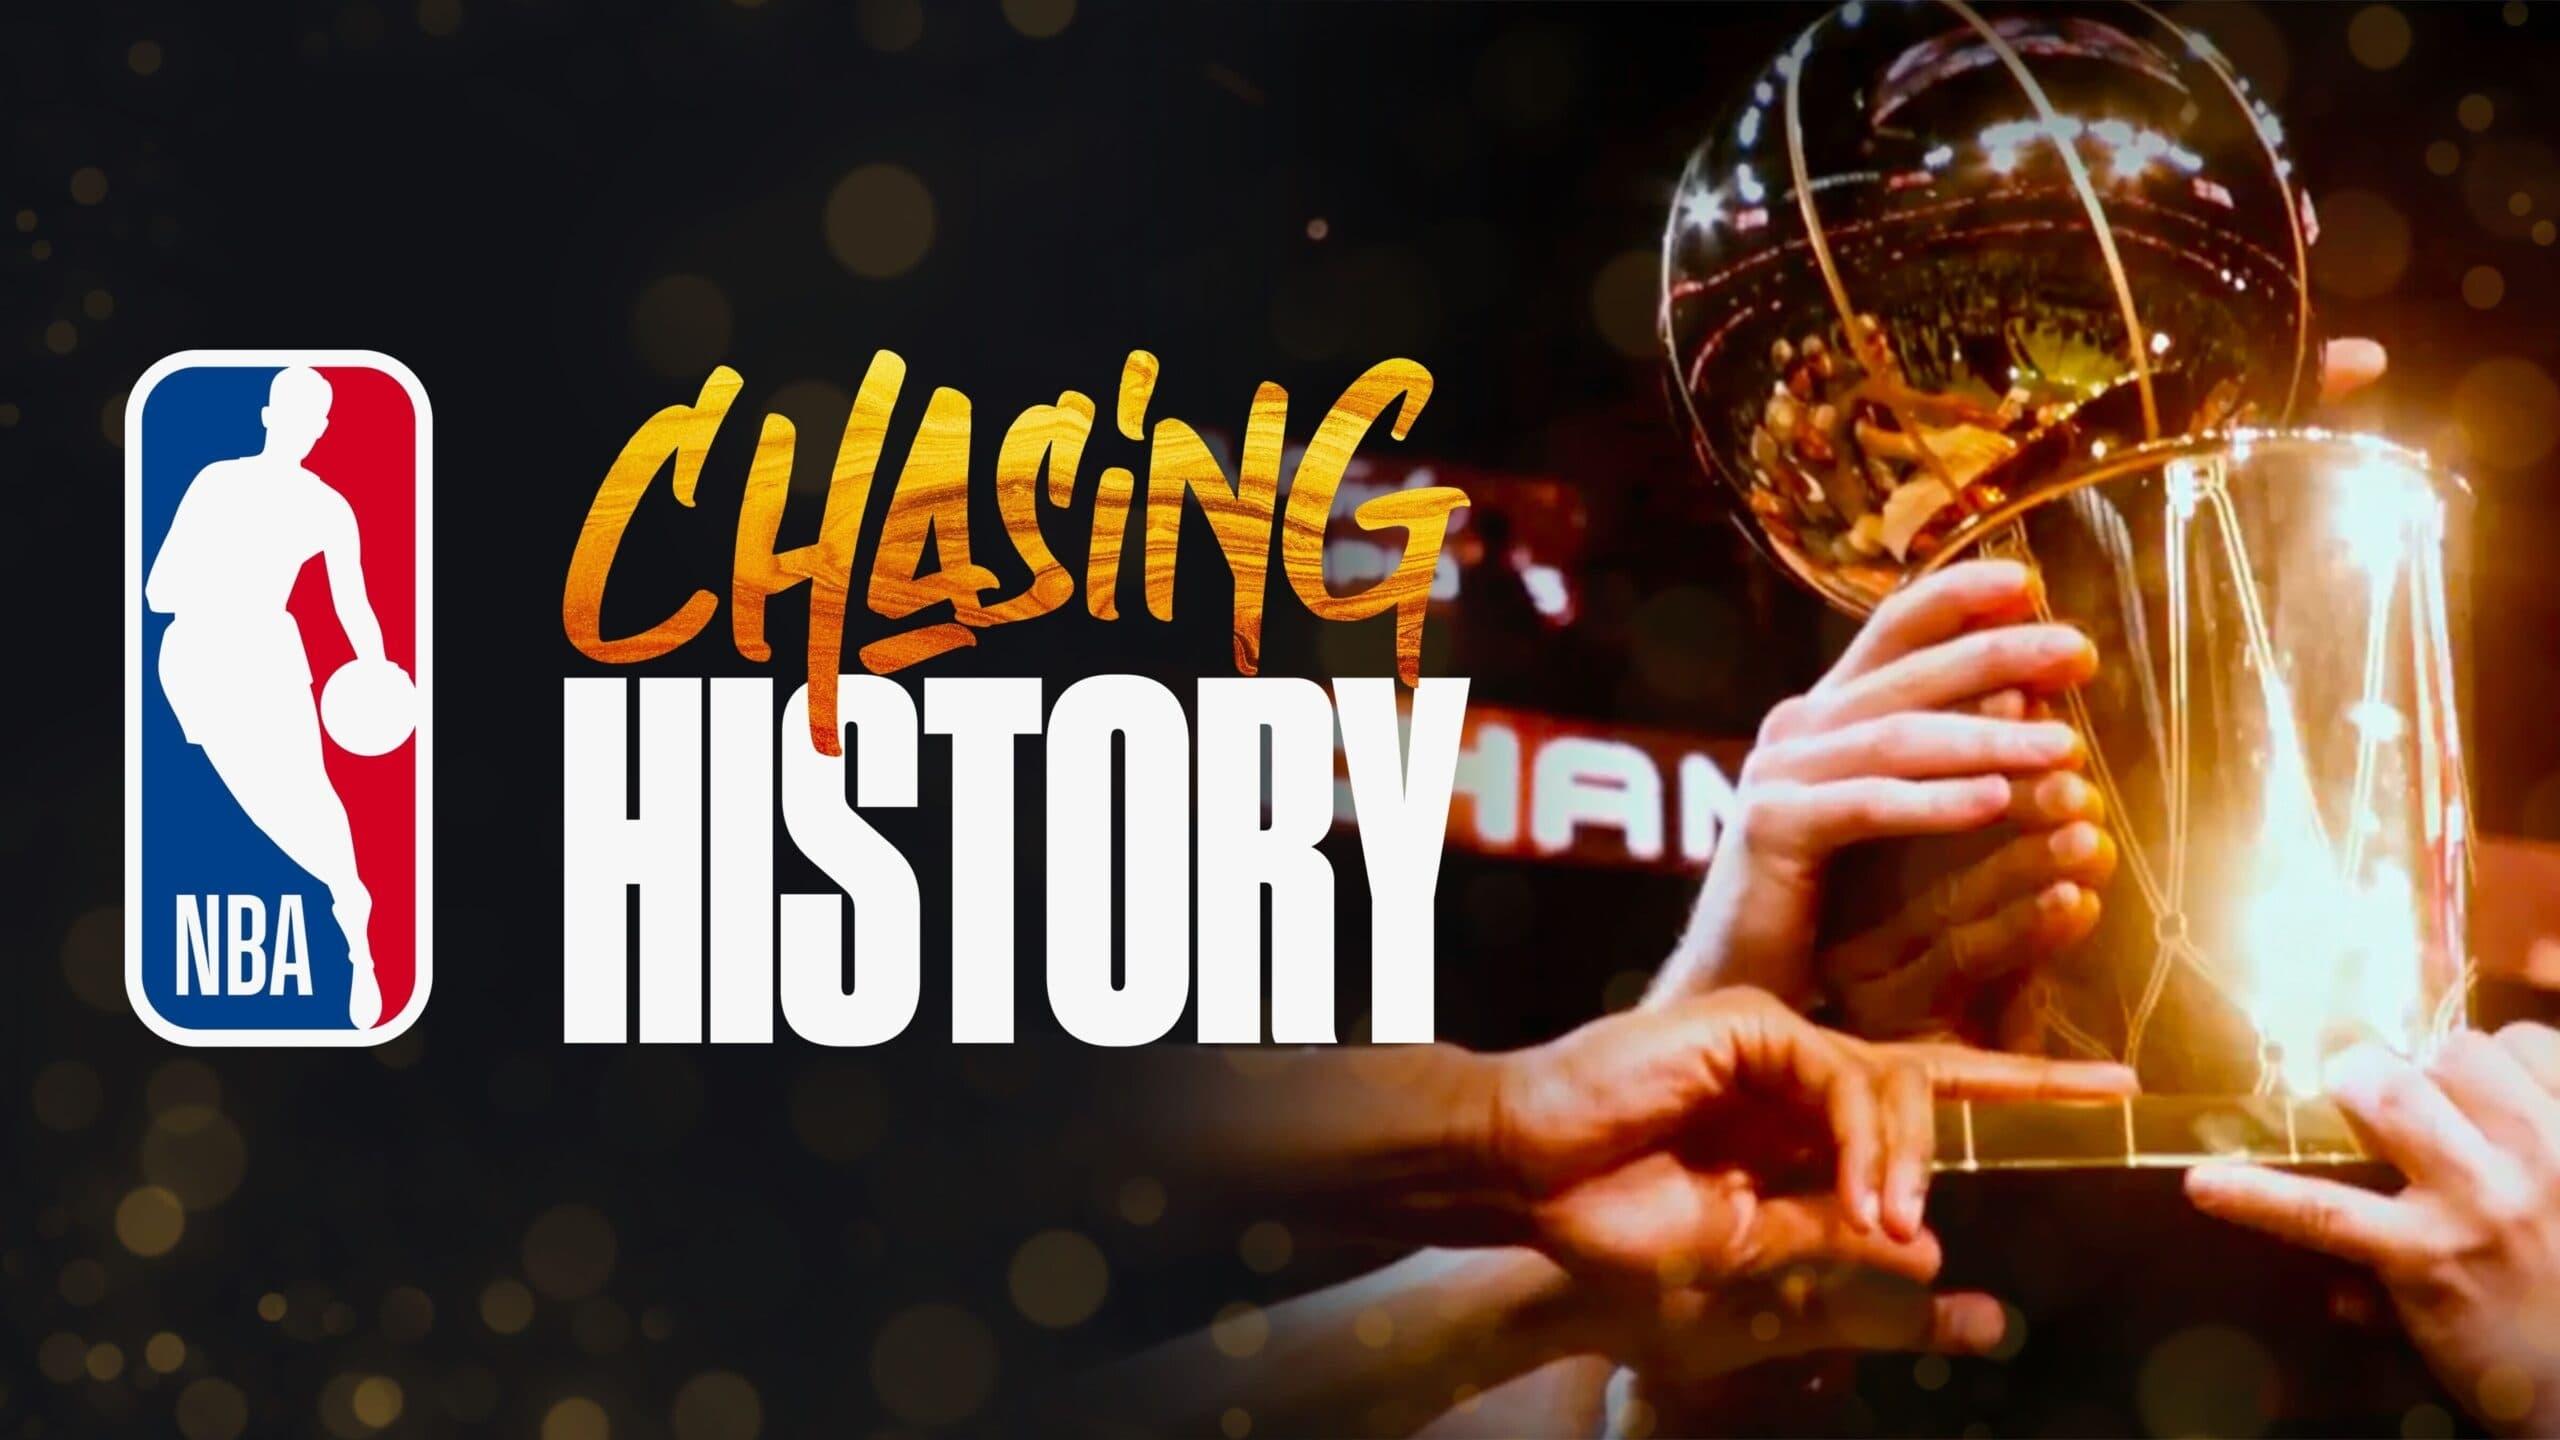 Chasing History: The 2022 Finals Mini Movie backdrop